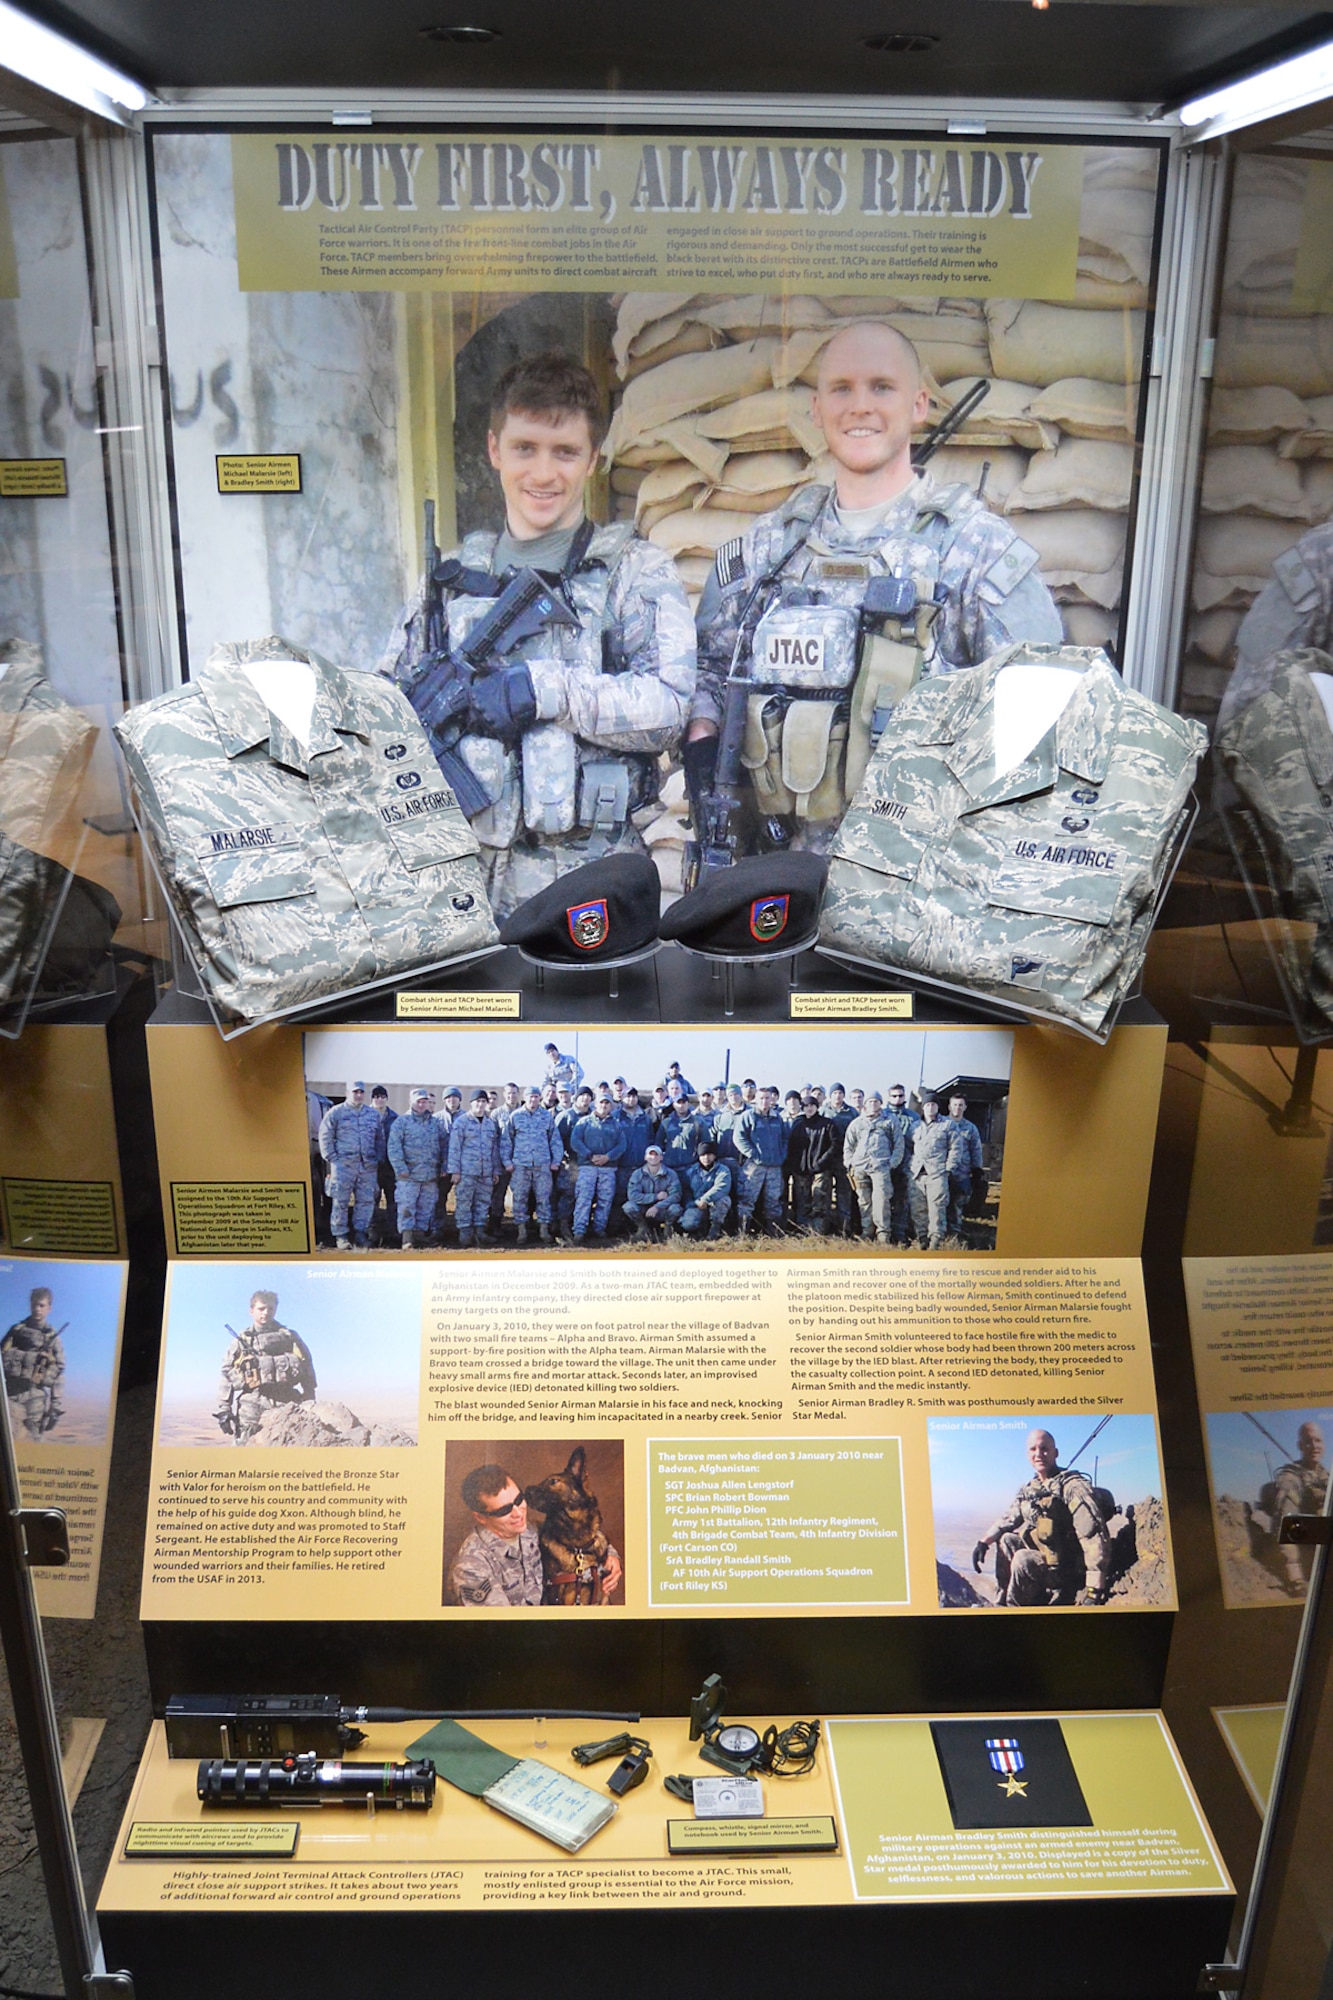 DAYTON, Ohio -- The "Duty First, Always Ready" exhibit, located in the Cold War Gallery at the National Museum of the U.S. Air Force, highlights the service of Senior Airmen Michael Malarsie and Bradley Smith, a two-man Joint Terminal Attack Controller (JTAC) who deployed together to Afghanistan in December 2009. (U.S. Air Force photo)